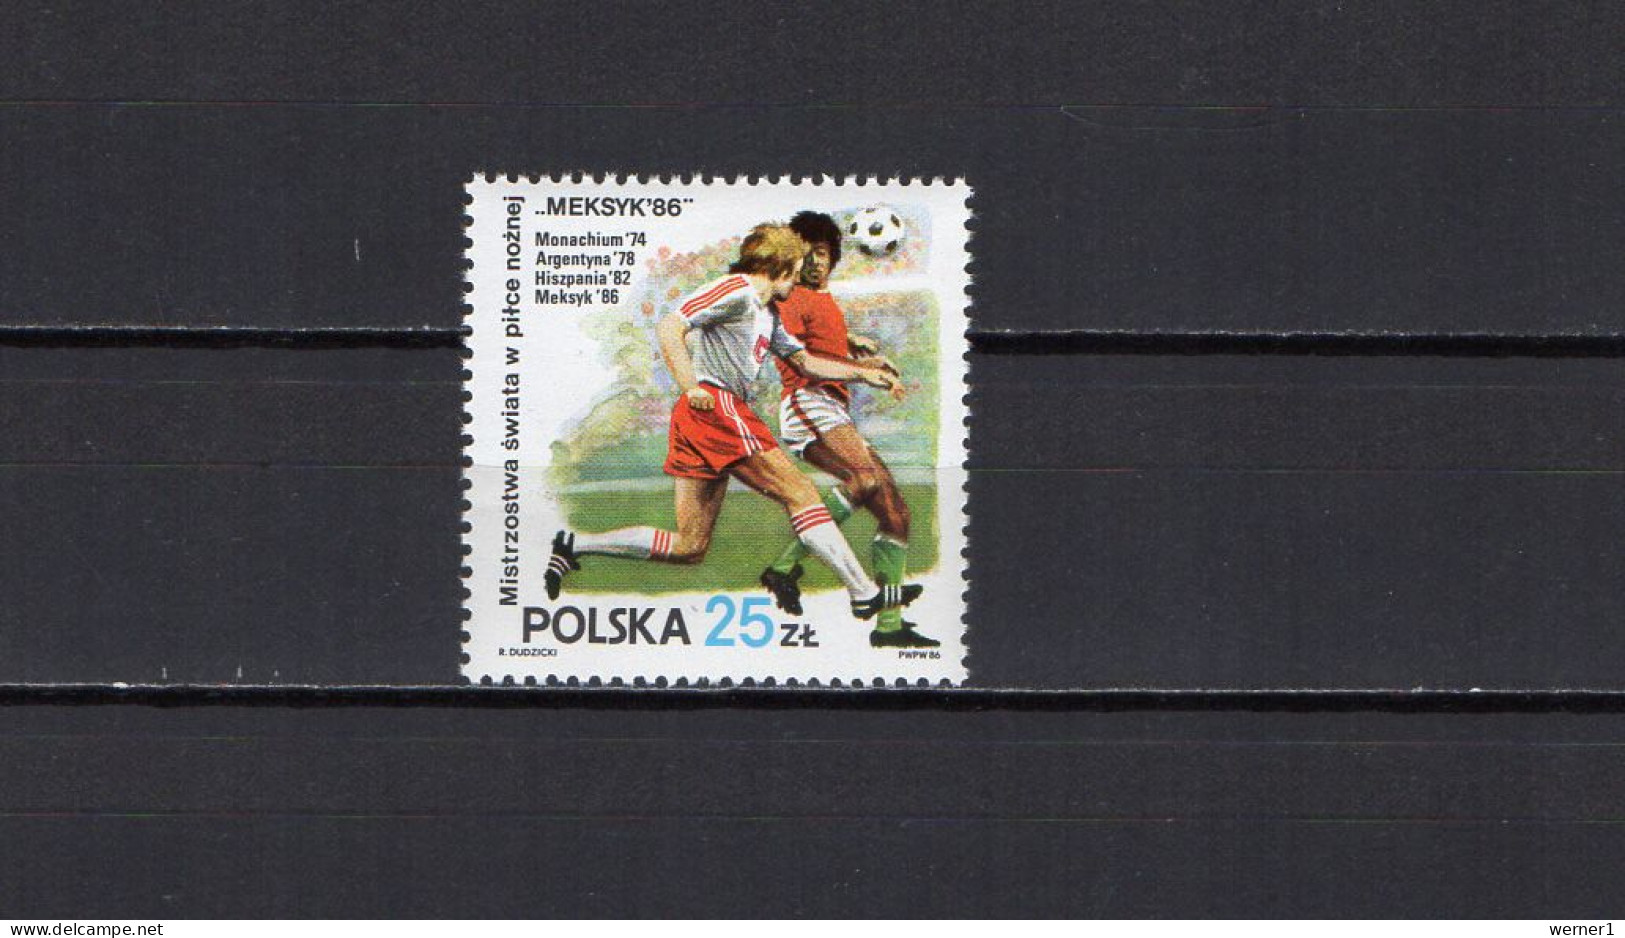 Poland 1986 Football Soccer World Cup Stamp MNH - 1986 – Mexico